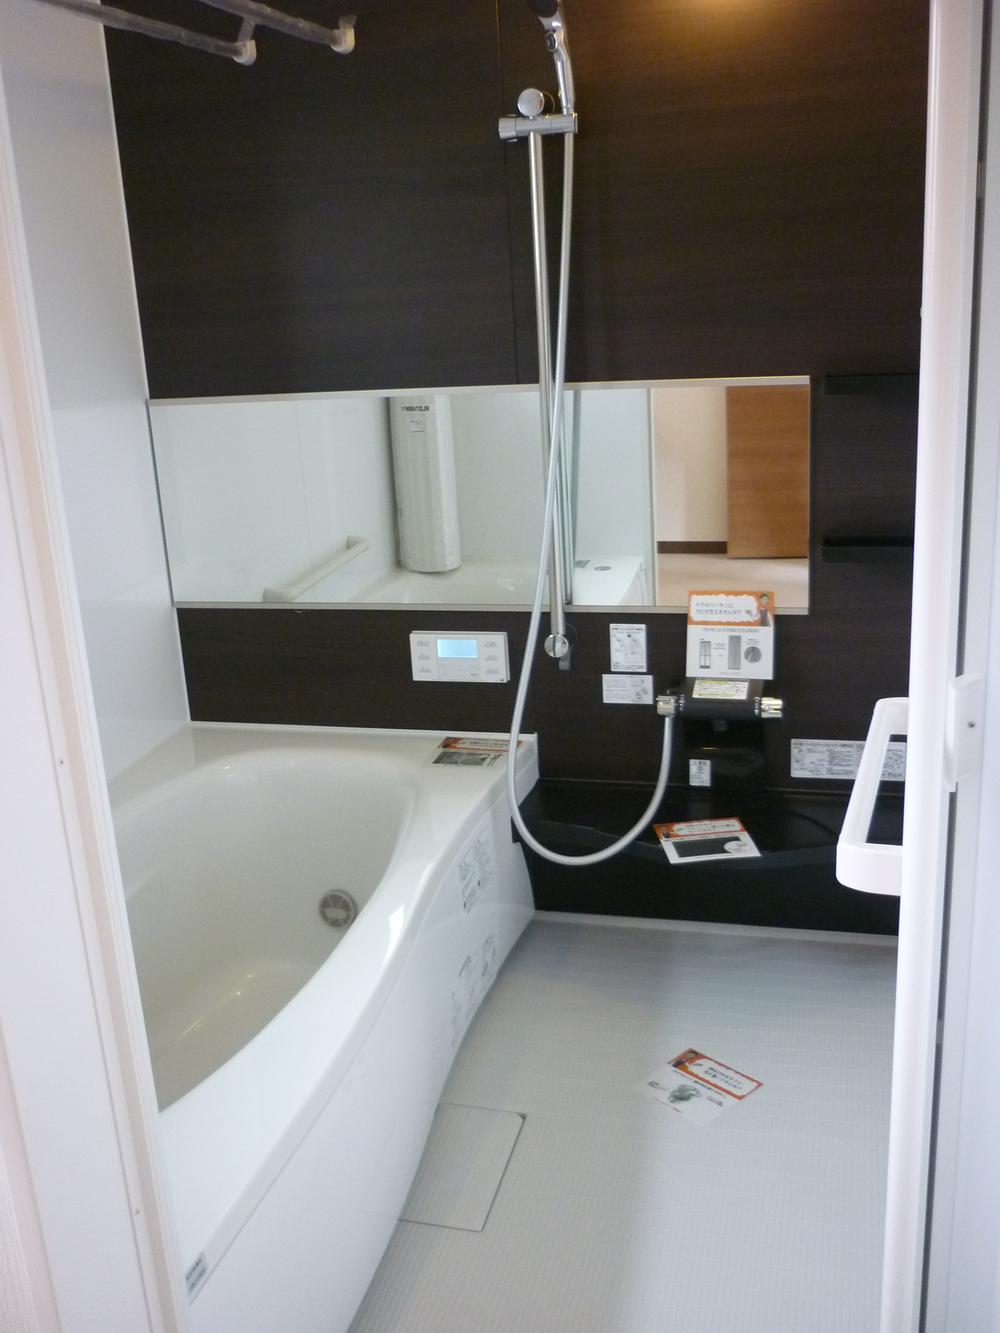 Bathroom.  [Model house bathroom] Also in communication of spacious bus with family, Also to relax ◎